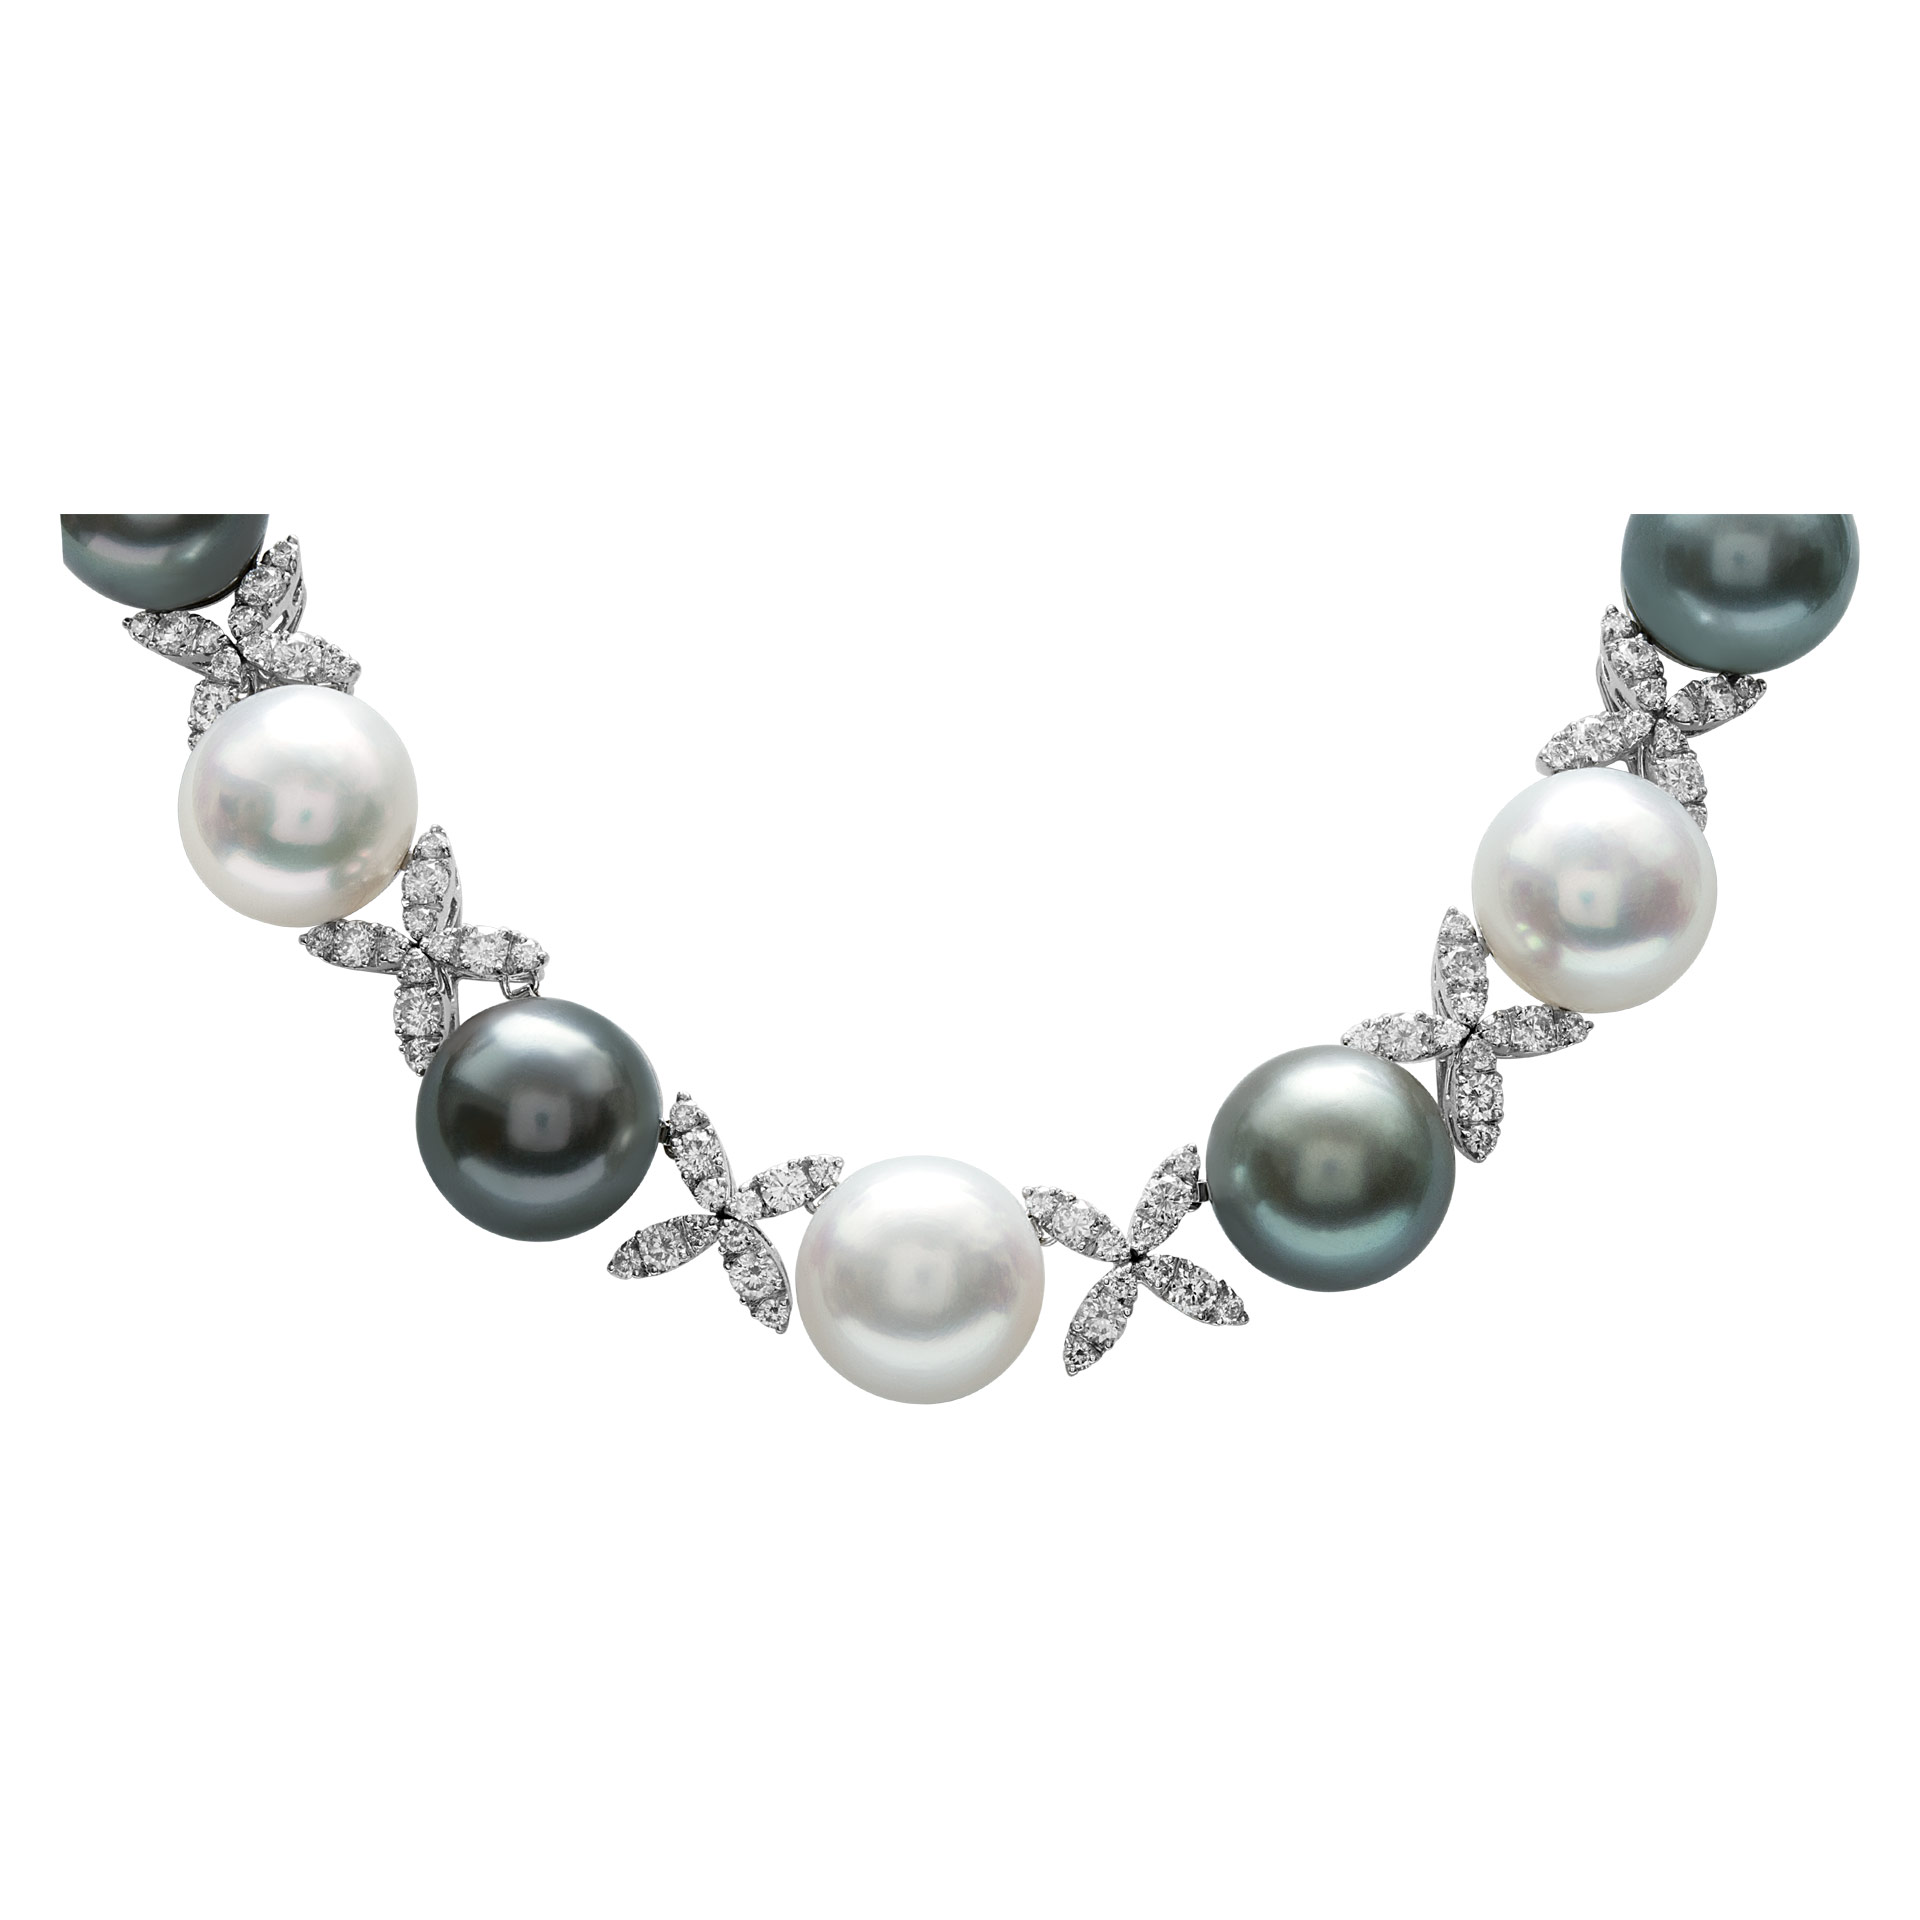 Pearl and diamond necklace with 11.91 cts in diamonds. image 1